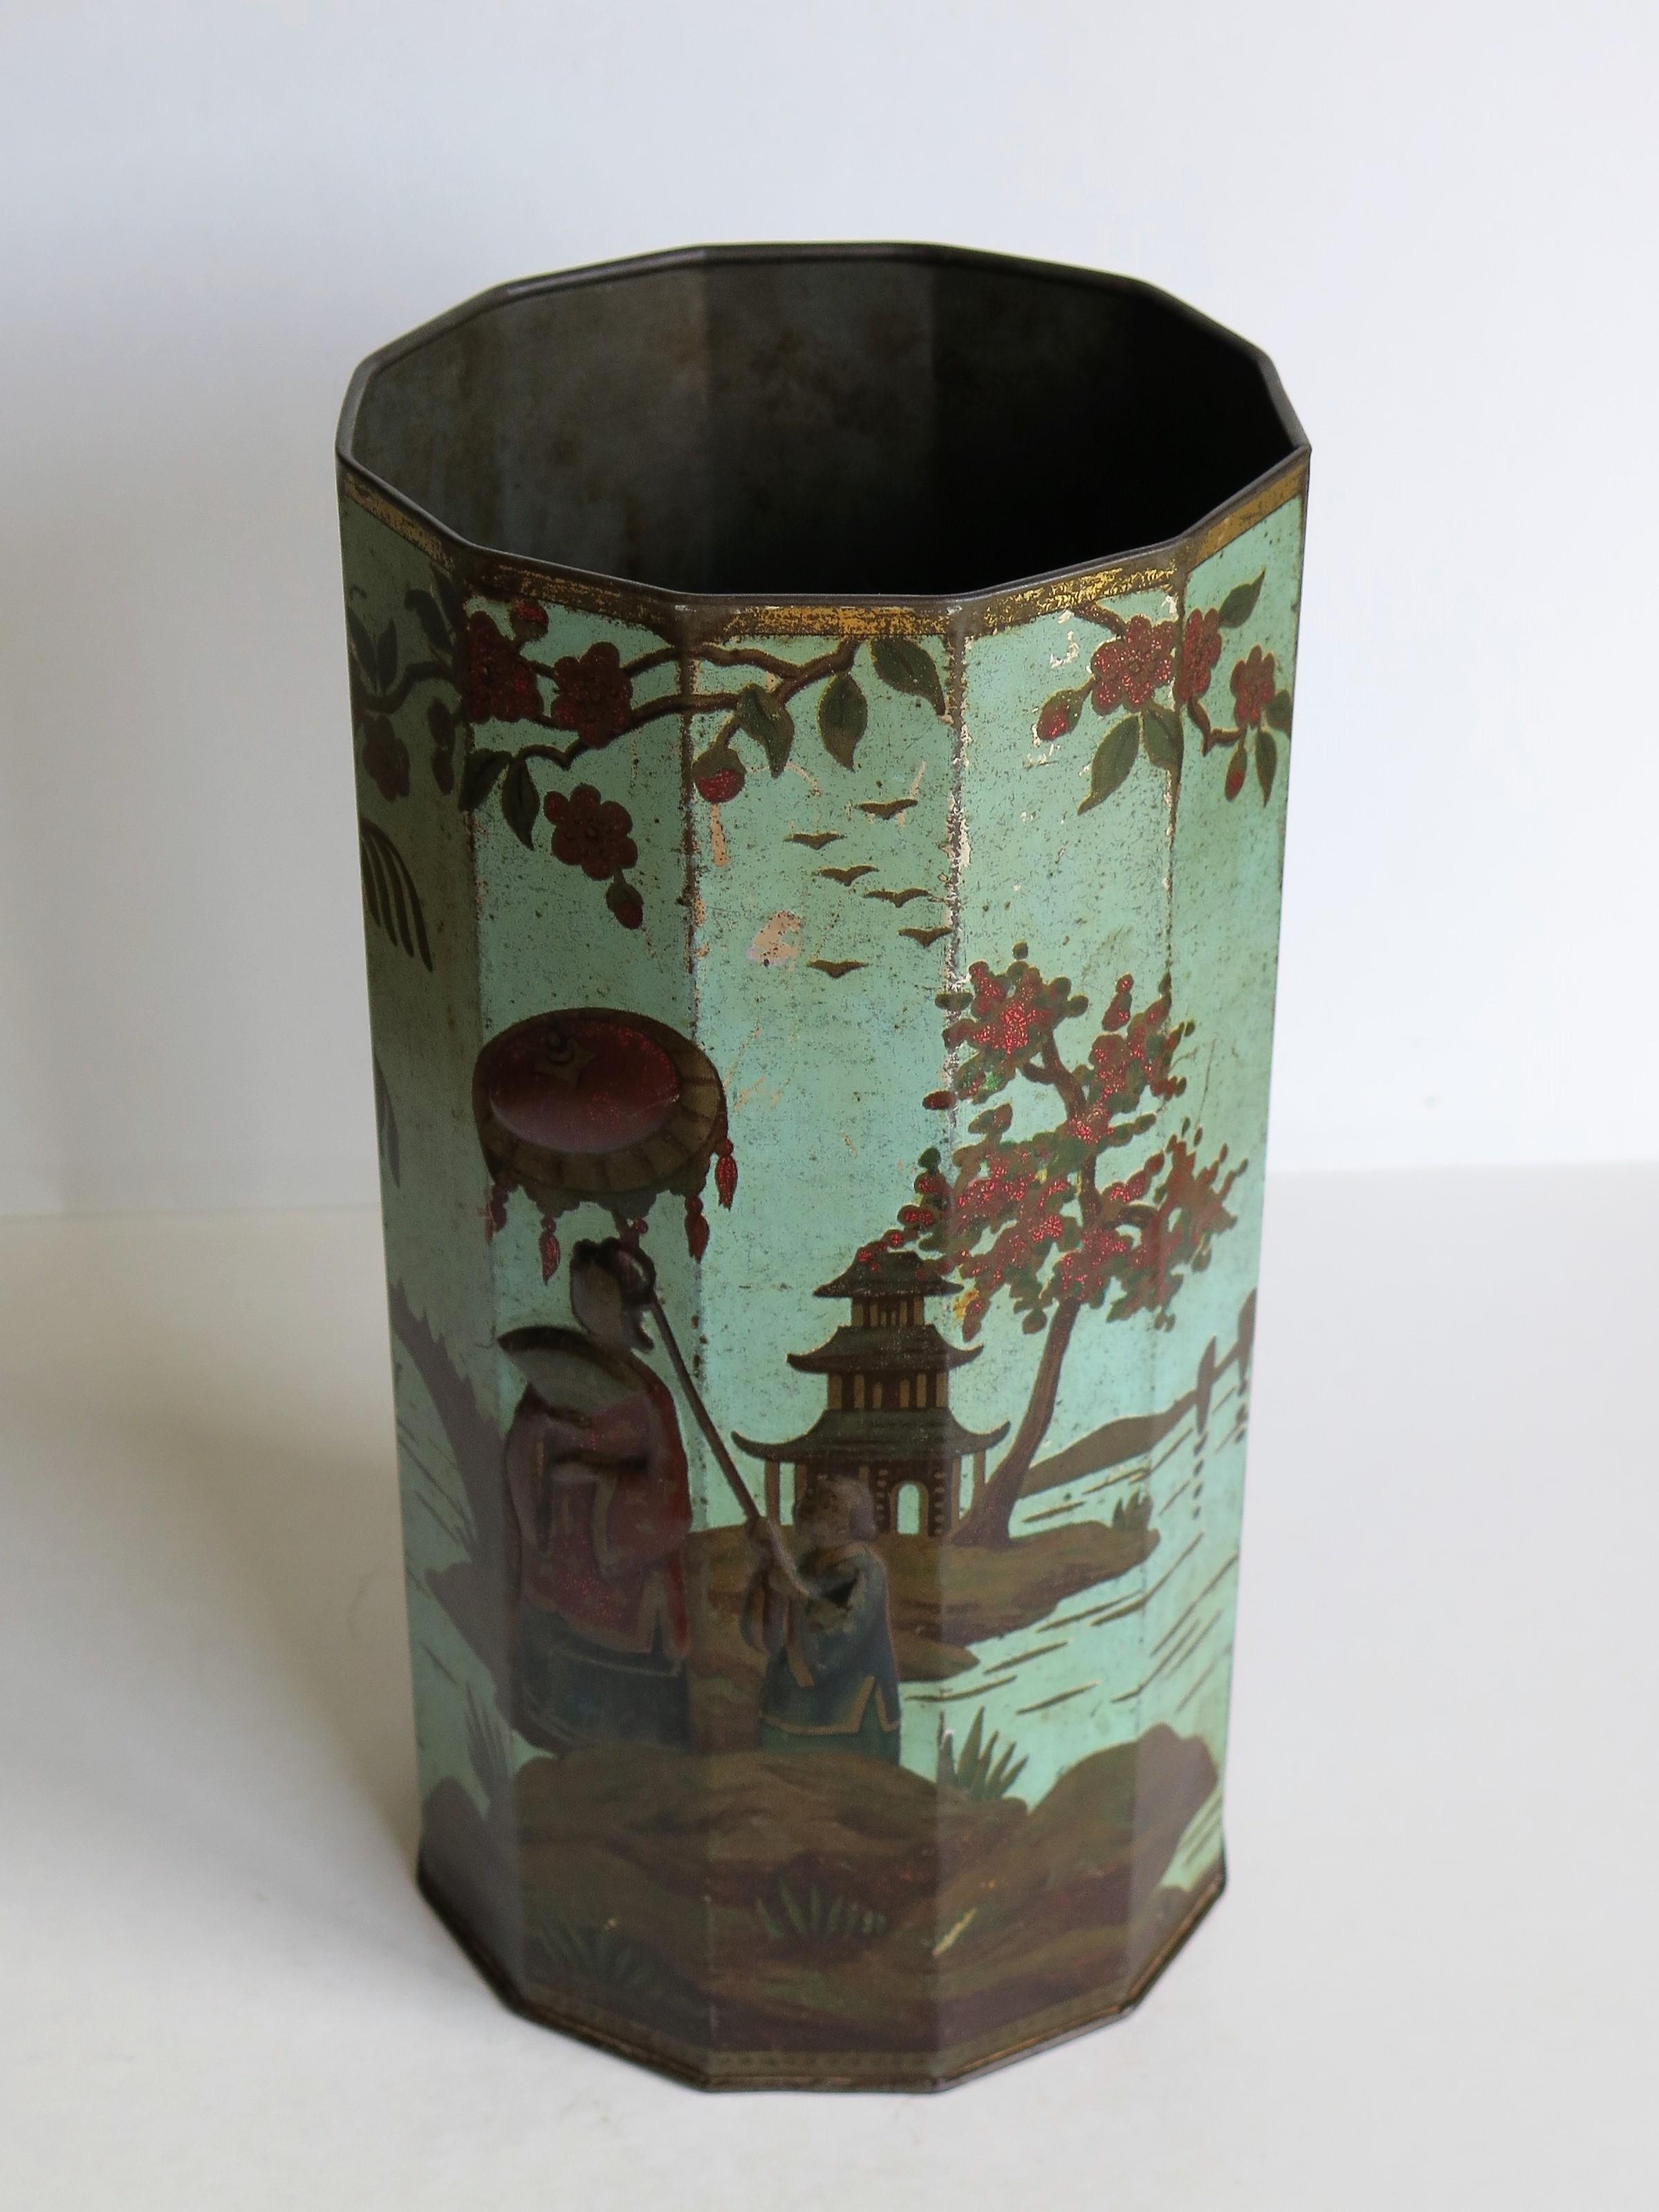 This is a very decorative tin bin or container with a colored scene of oriental figures which we date to the late 19th or early 20th century. It has many possible uses in the home as a small waste bin, a vase for dried flowers or simply displayed as